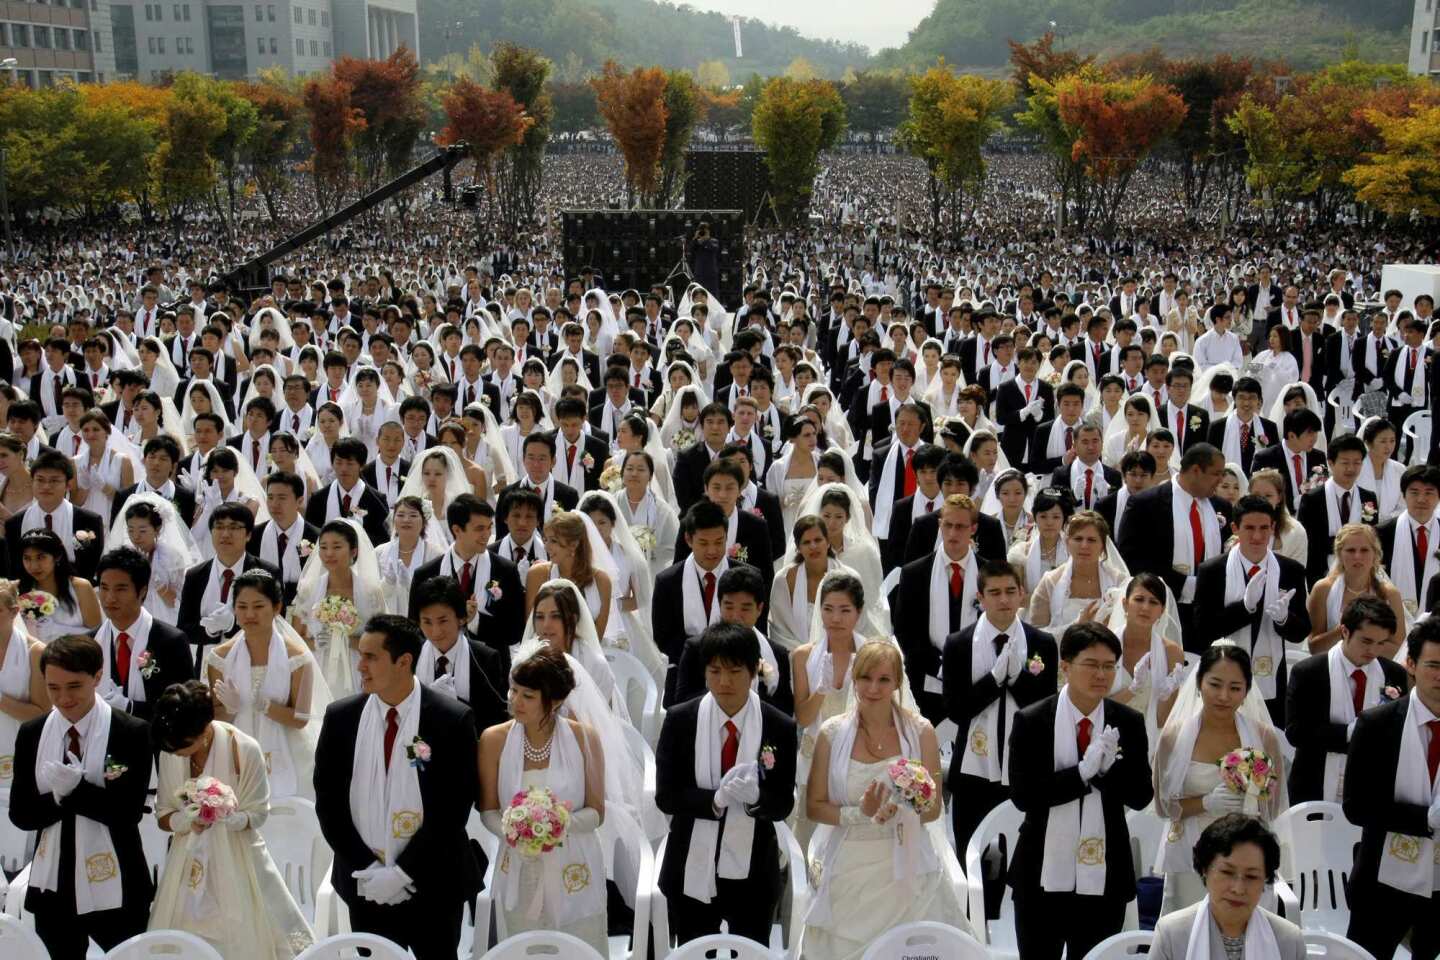 Couples from around the world participate in a mass wedding ceremony at Sun Moon University in Asan, South Korea, arranged by the reverend's Unification Church.